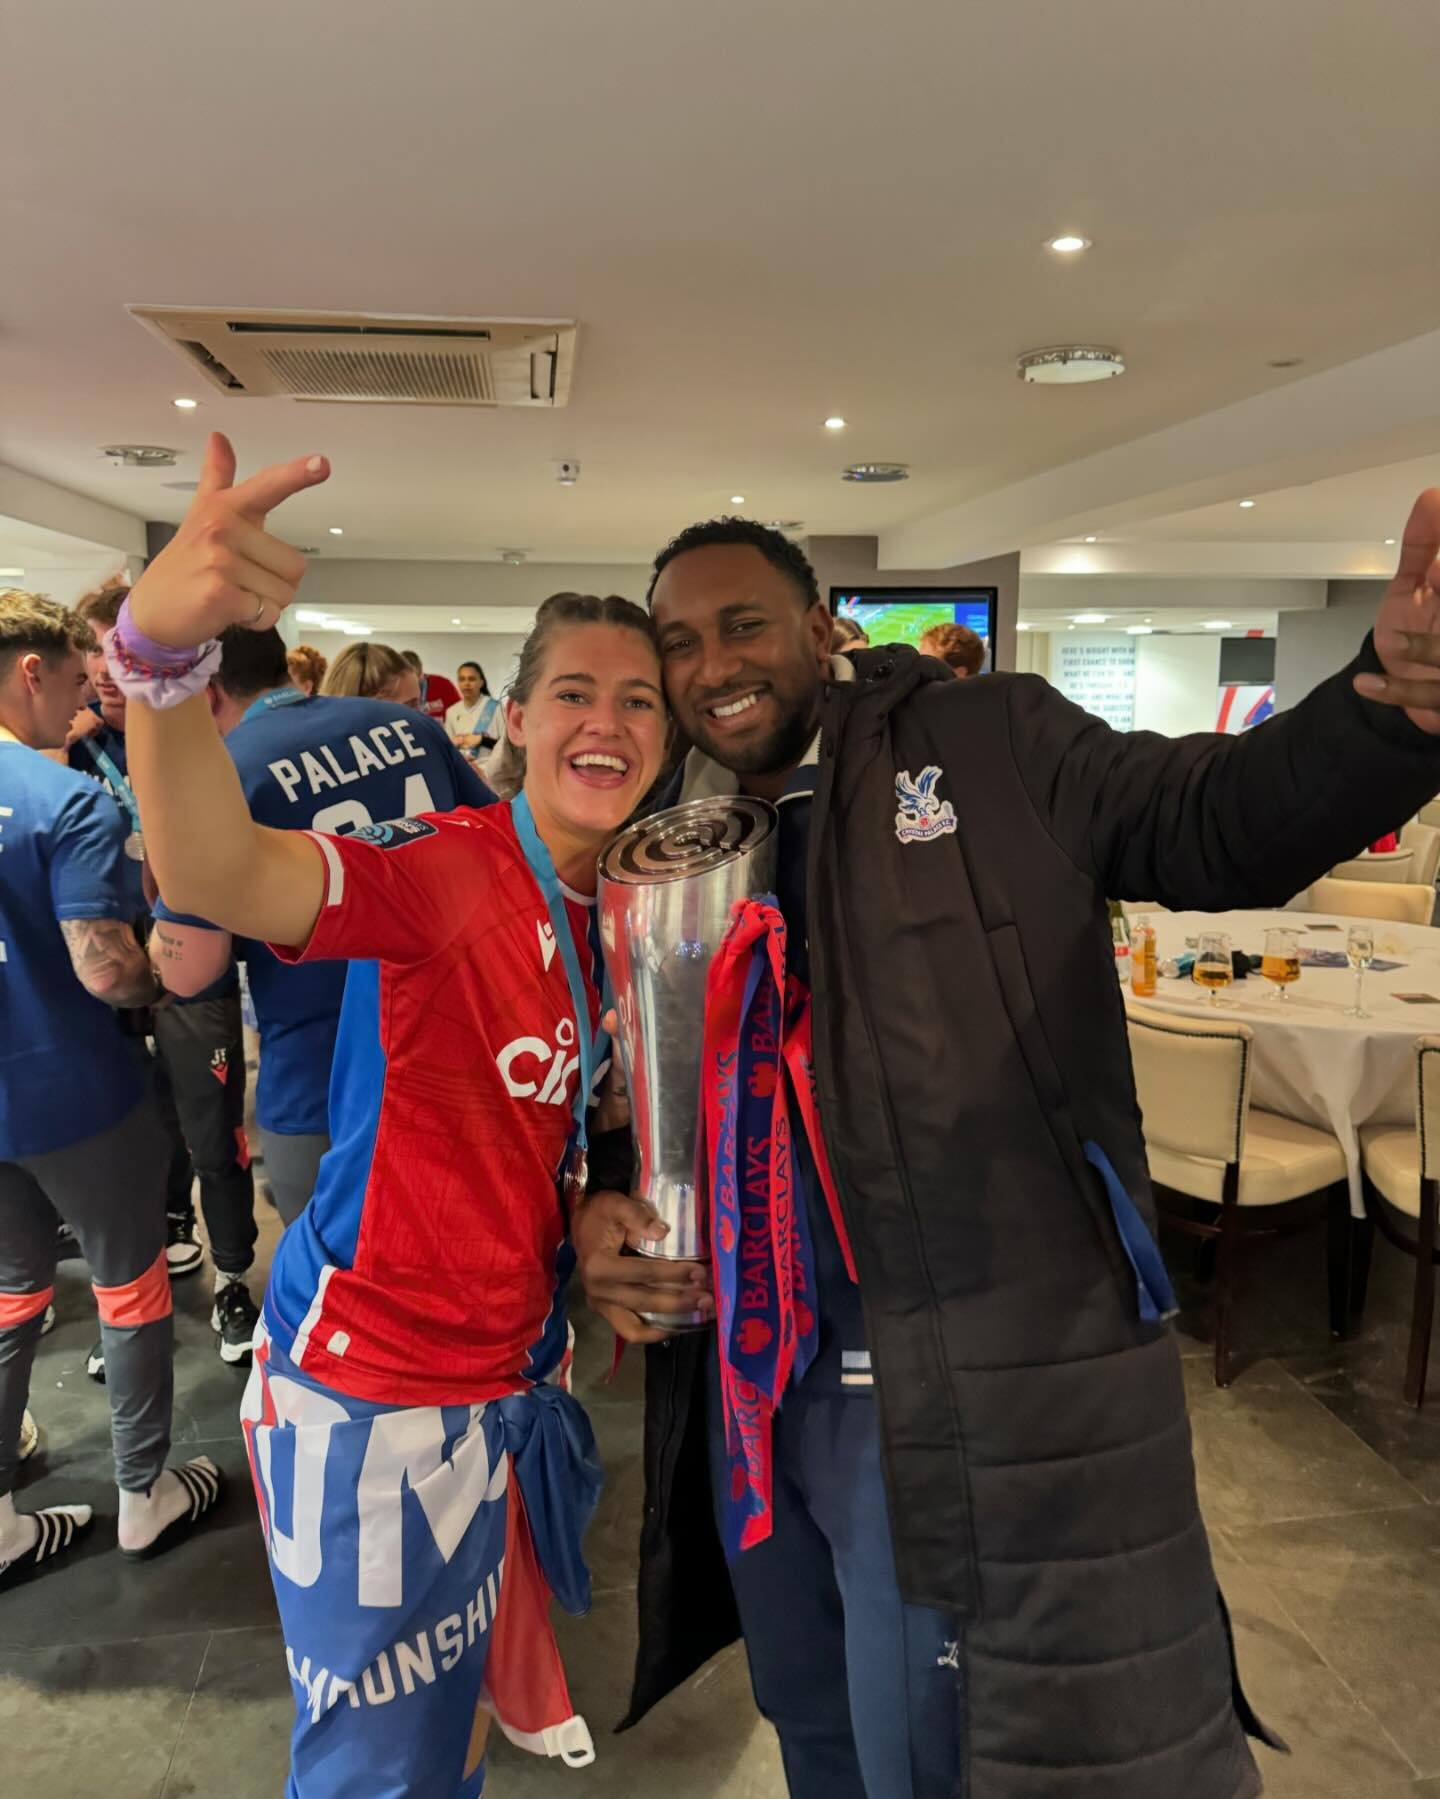 The @CPFC_W done it 🏆 Won the Championship and are headed for the @BarclaysWSL - Huge shout to all the team and everyone behind the scenes, everyone who came before and paved the way to get this team where they are today. @leighnicol you're a lynchp